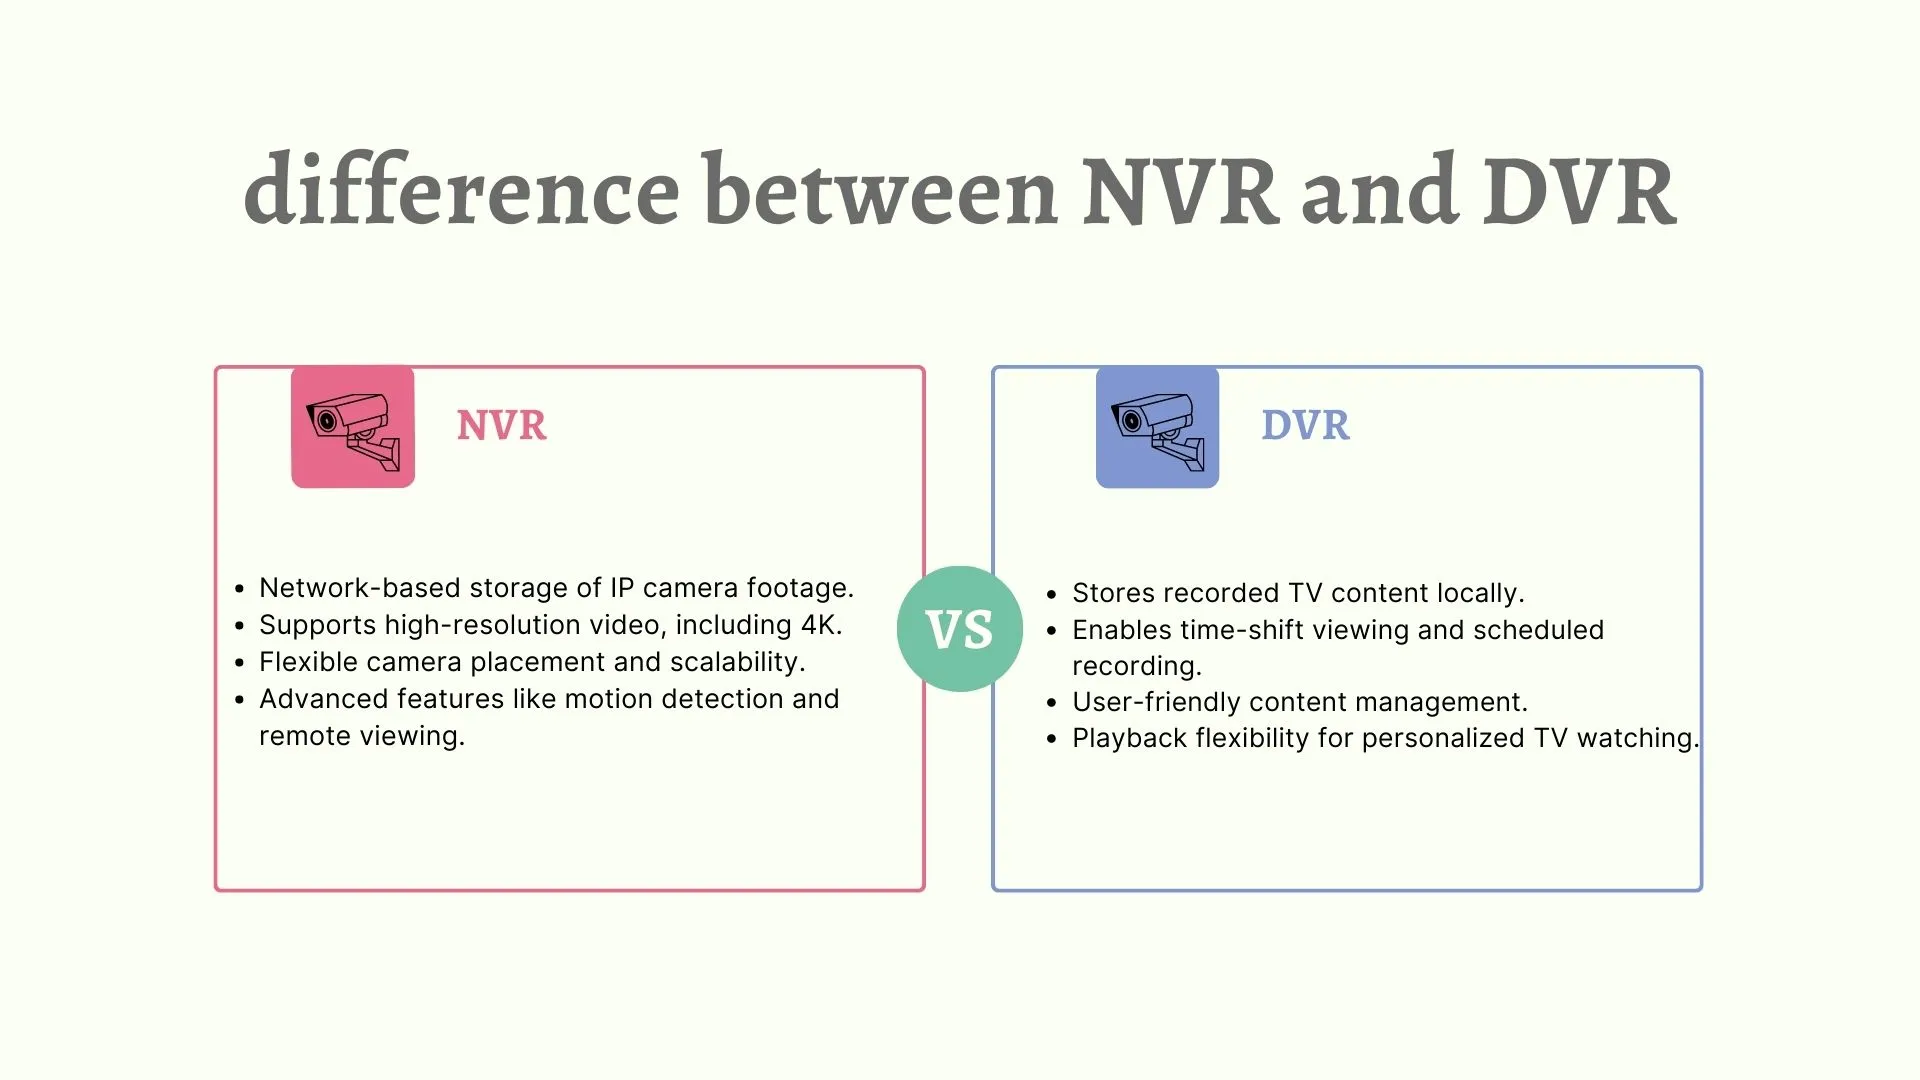 Differences between NVR and DVR